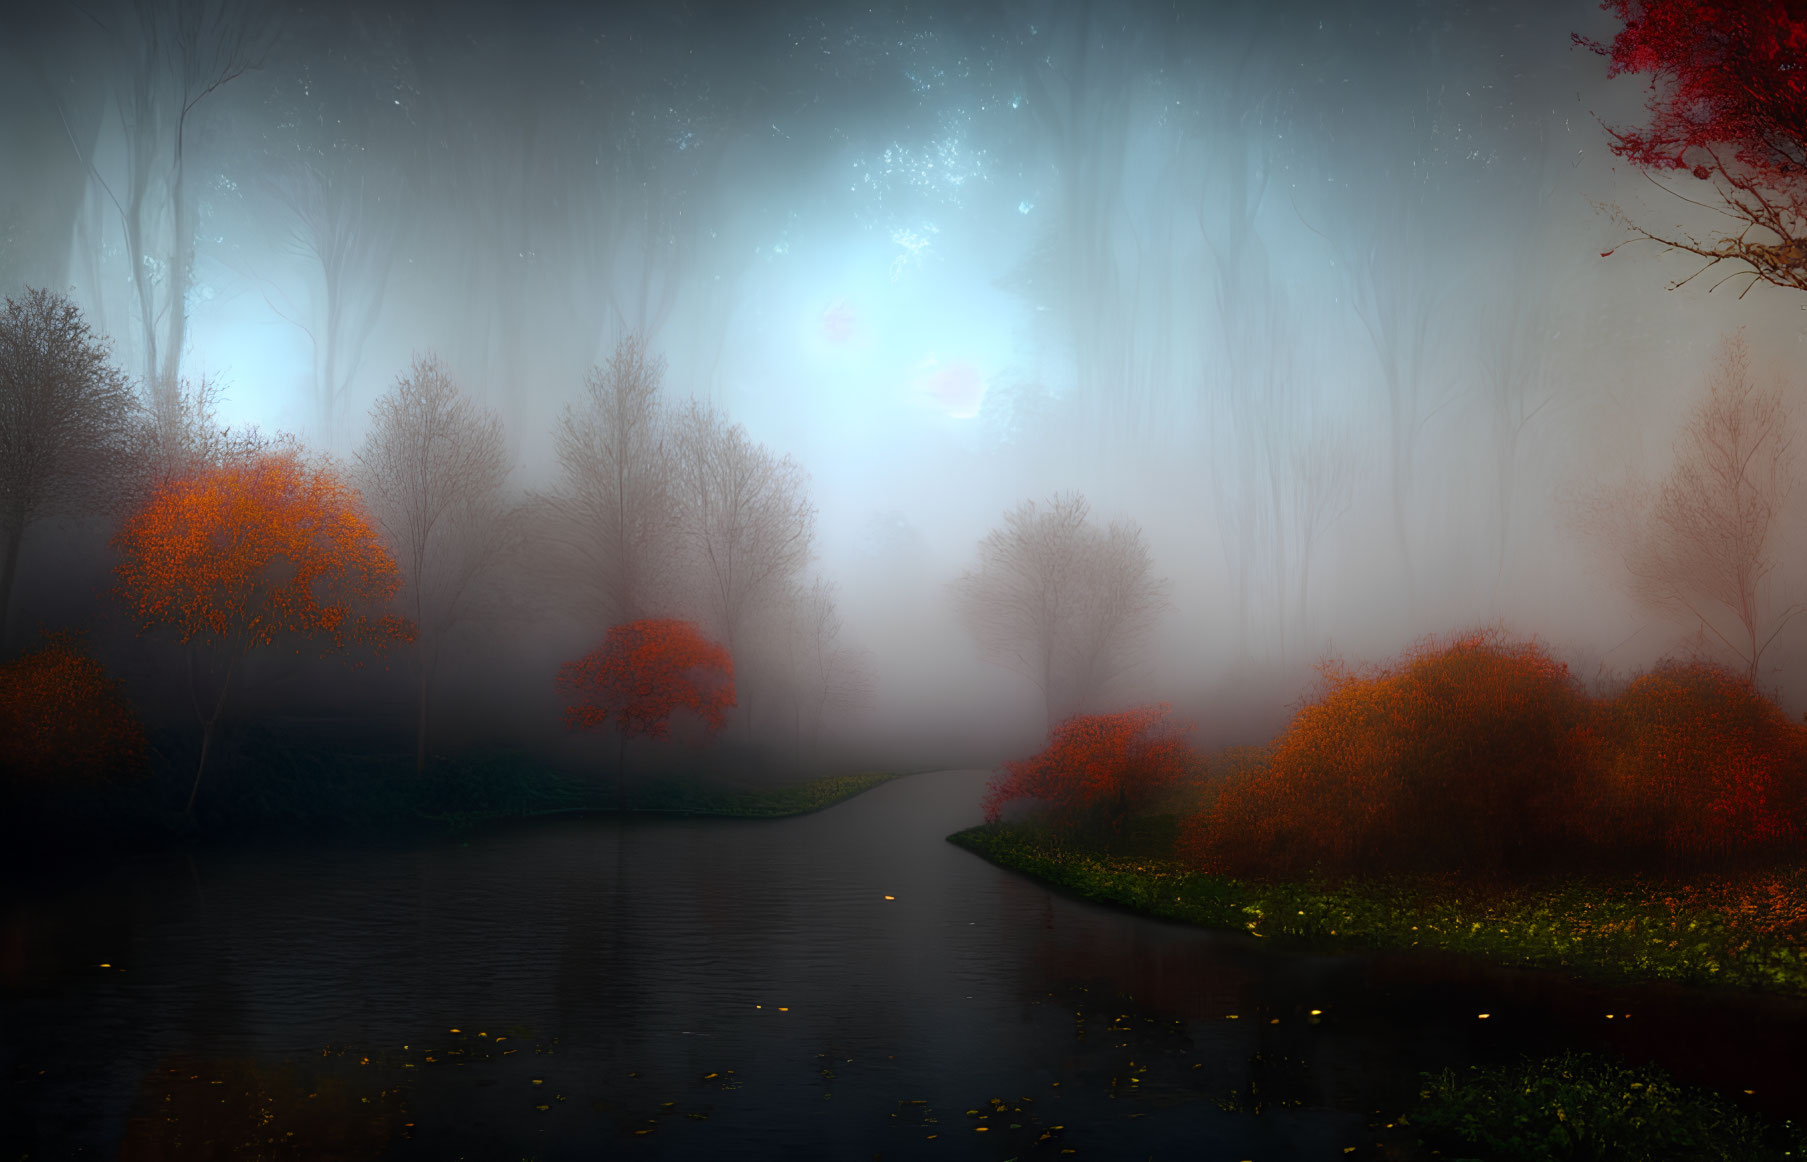 Mystical foggy landscape with glowing lights and red-leaved trees